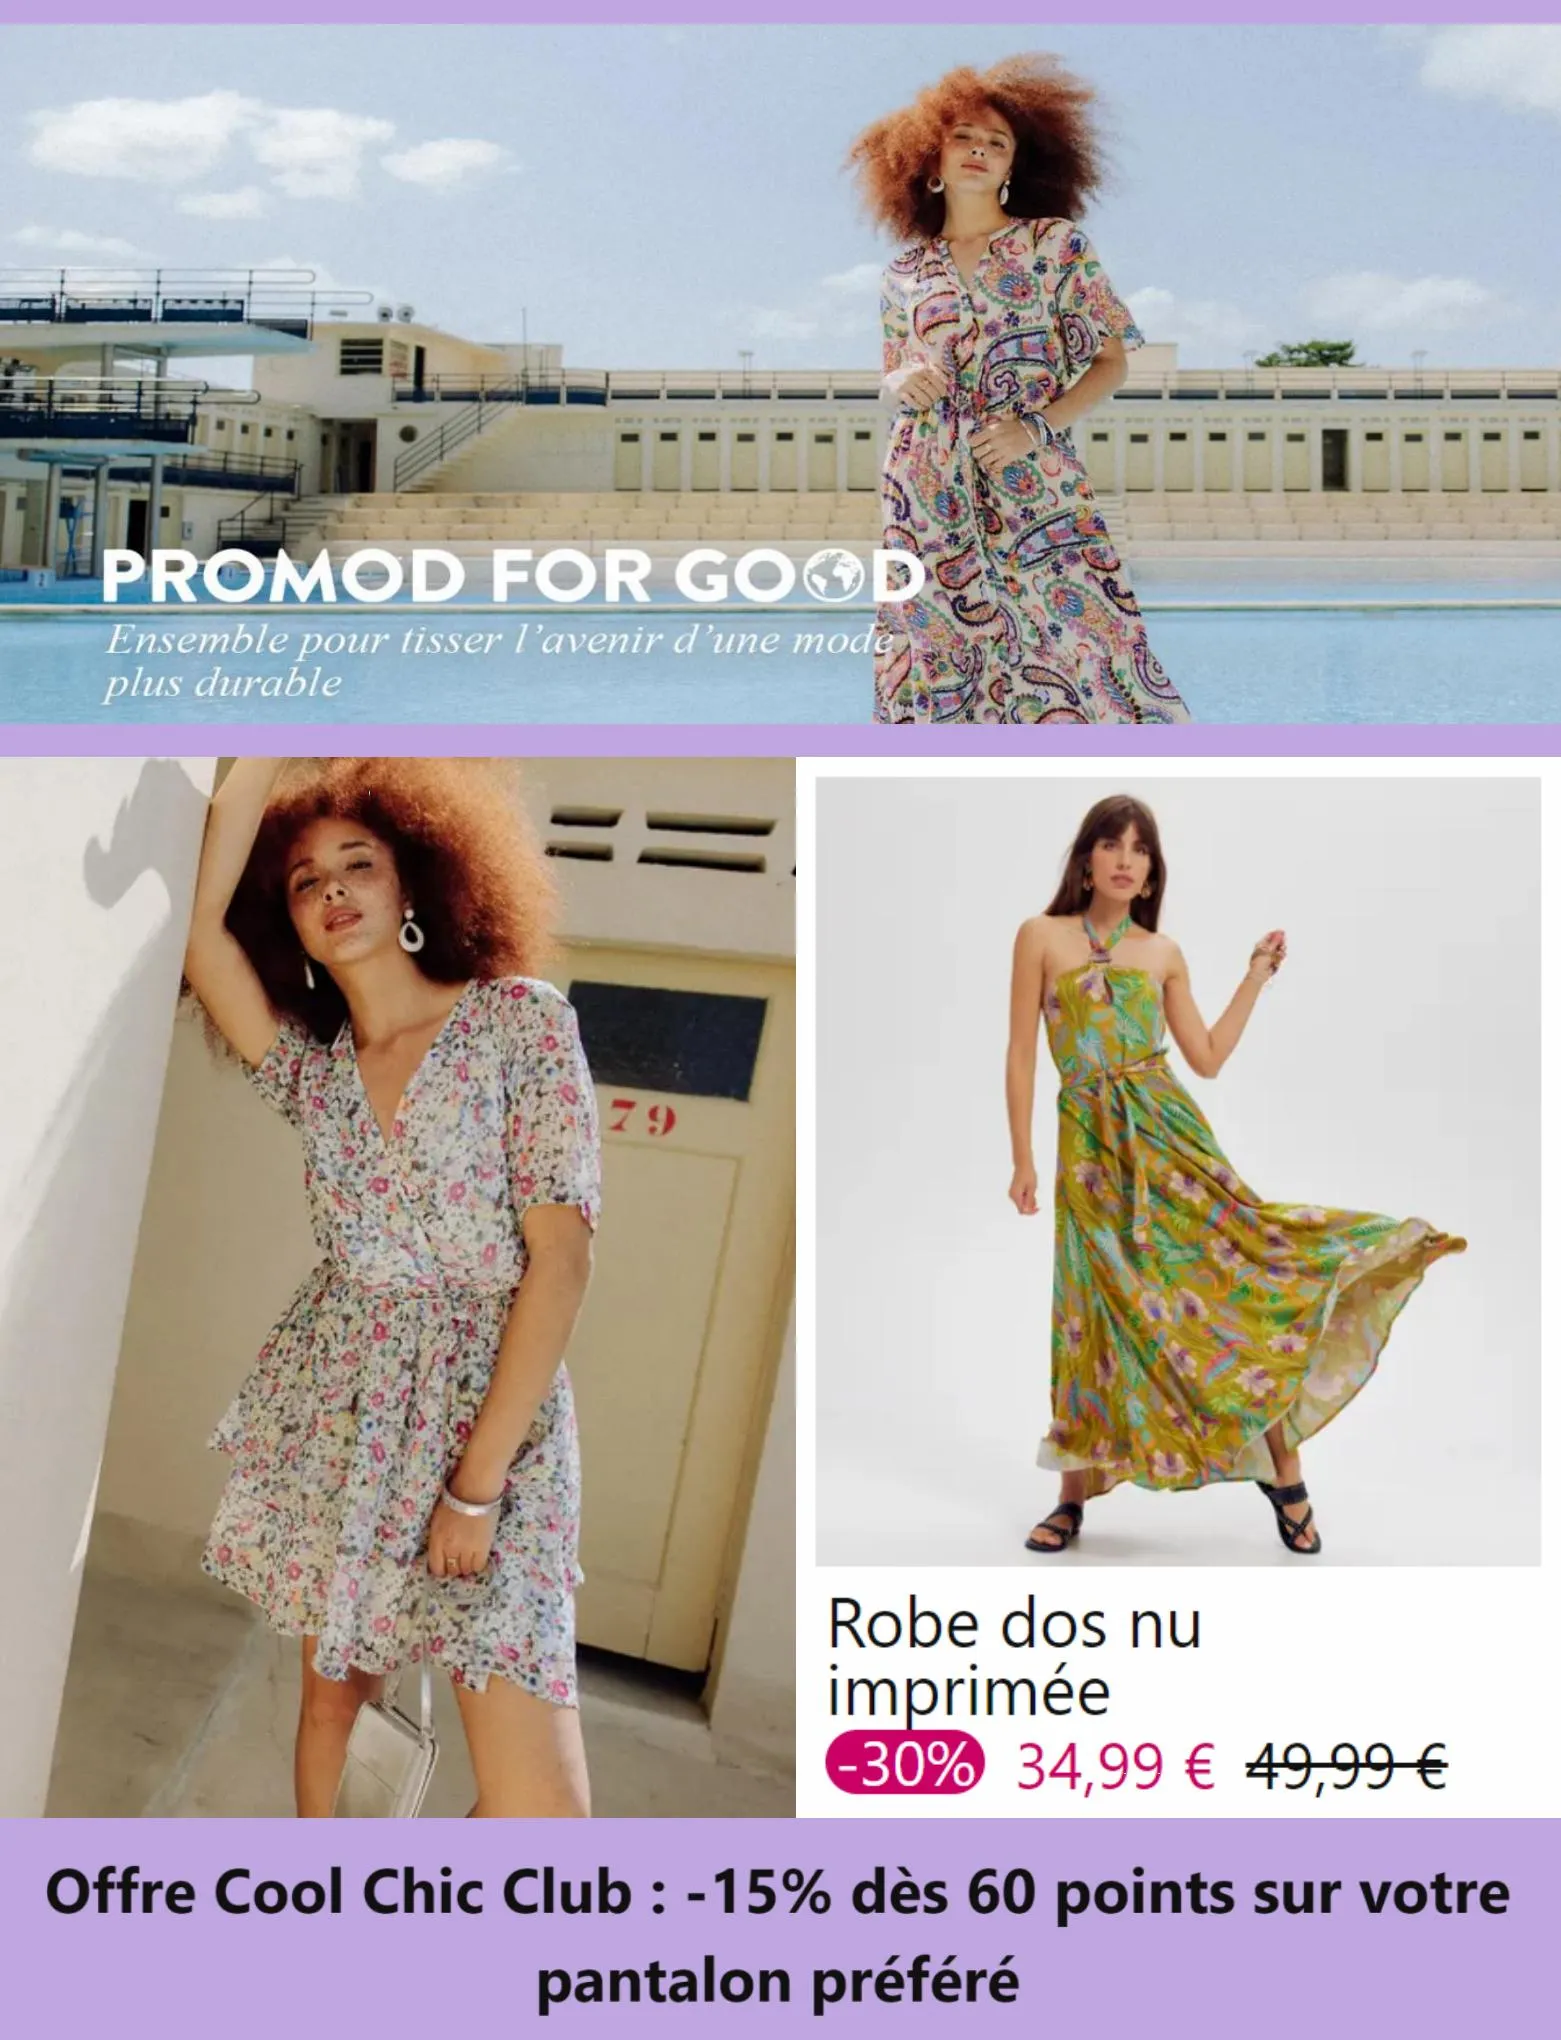 Catalogue Promod for Good, page 00001